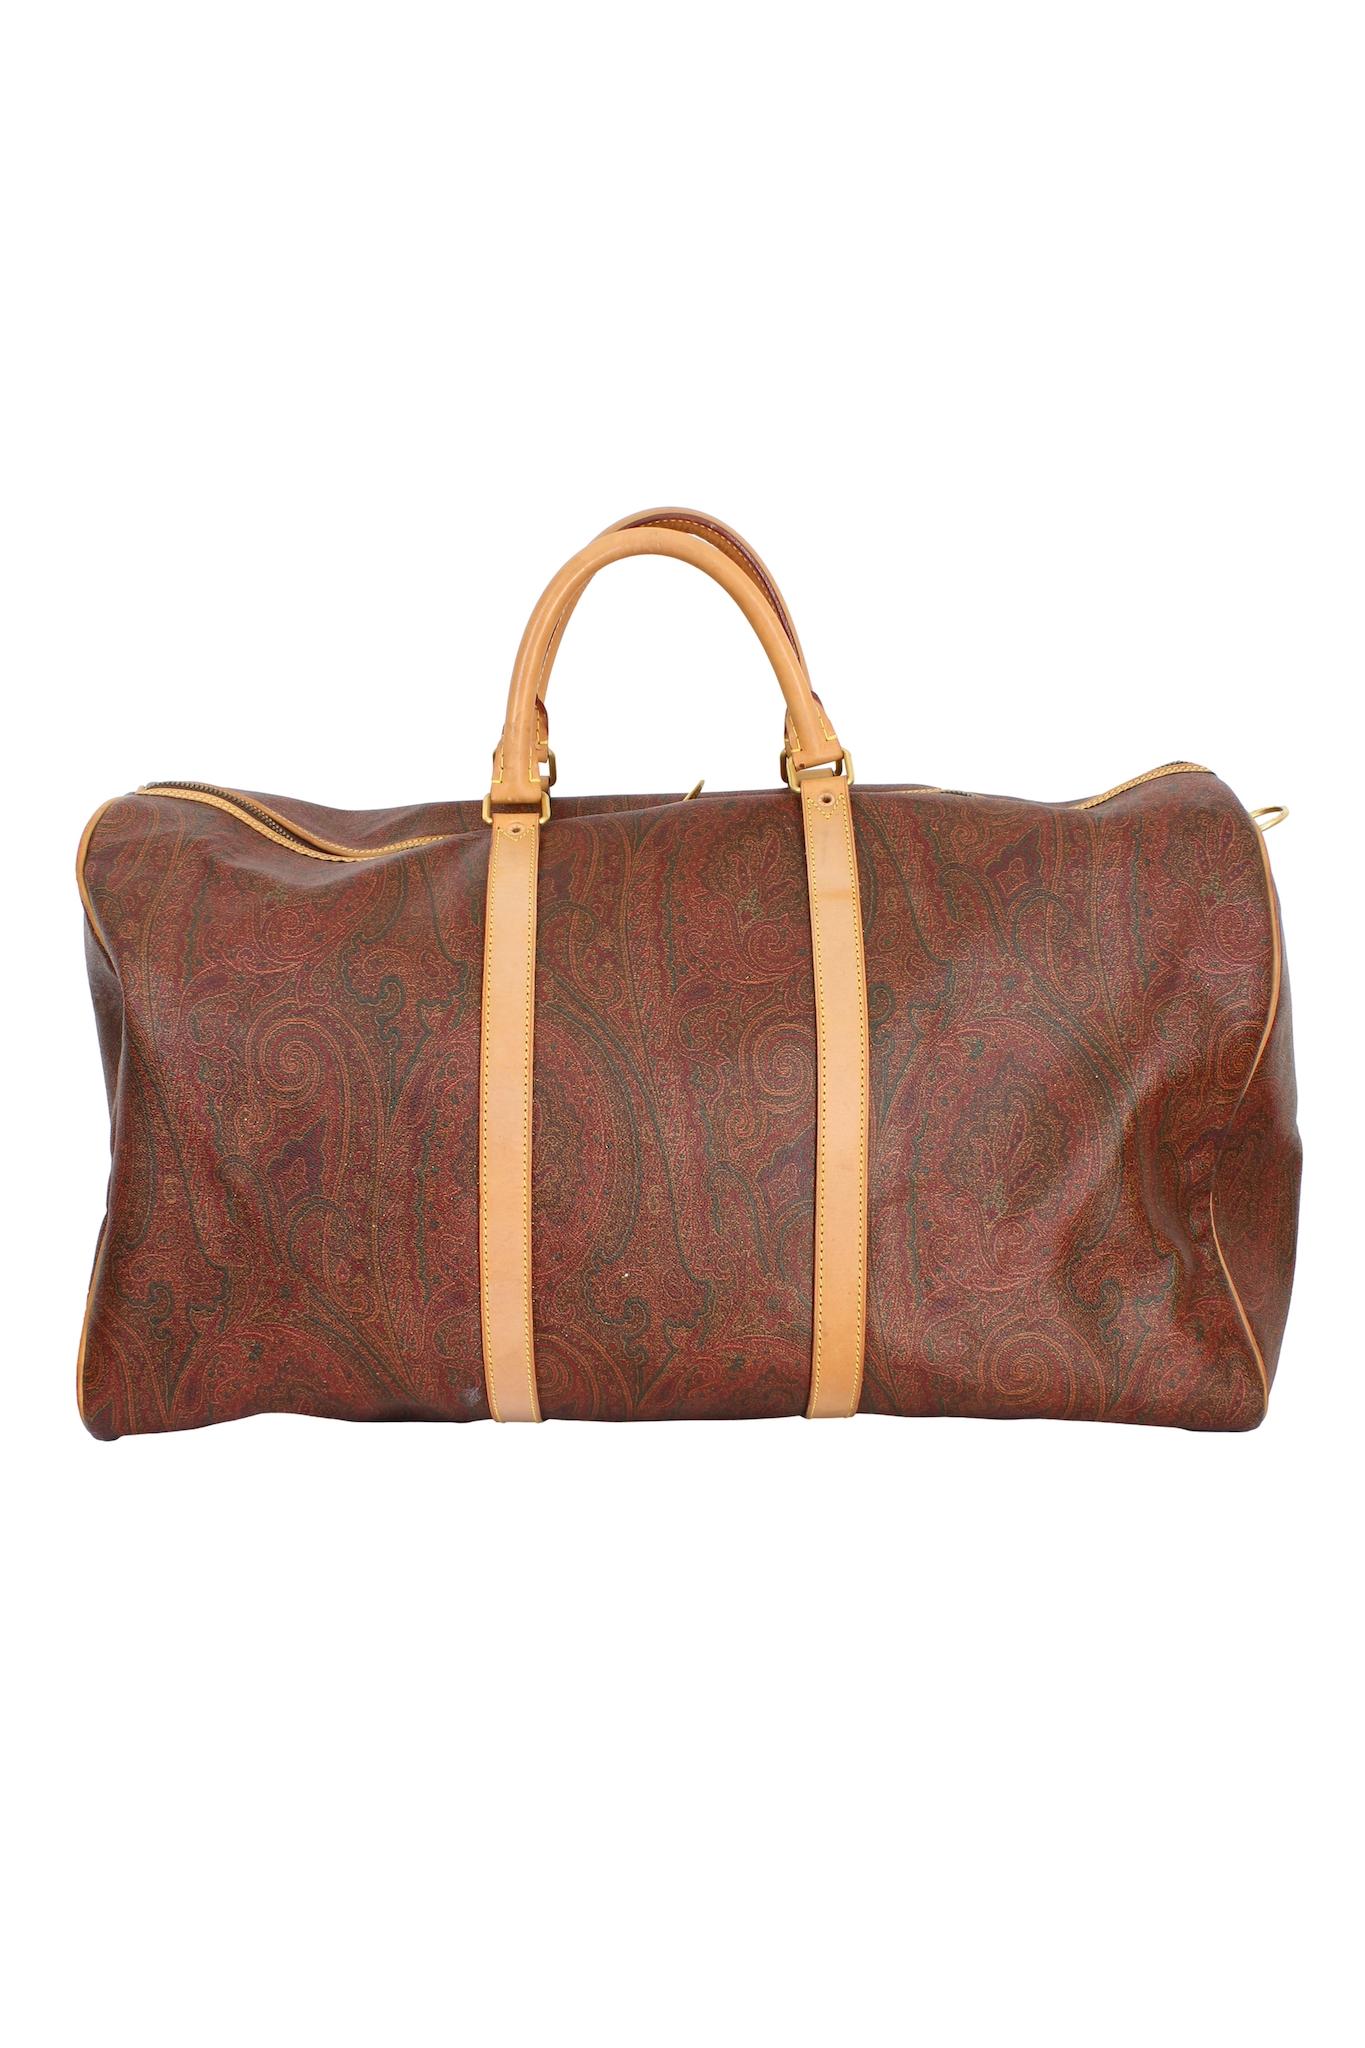 Etro Boston model duffle bag, vintage 1995s. Brown and beige color with paisley print. Top zip closure, two round handles, single compartment, internal zip pocket. Canvas and leather fabric. Made in Italy.

Code: 0720912 - 27 Oct 95 - 0005

Height: